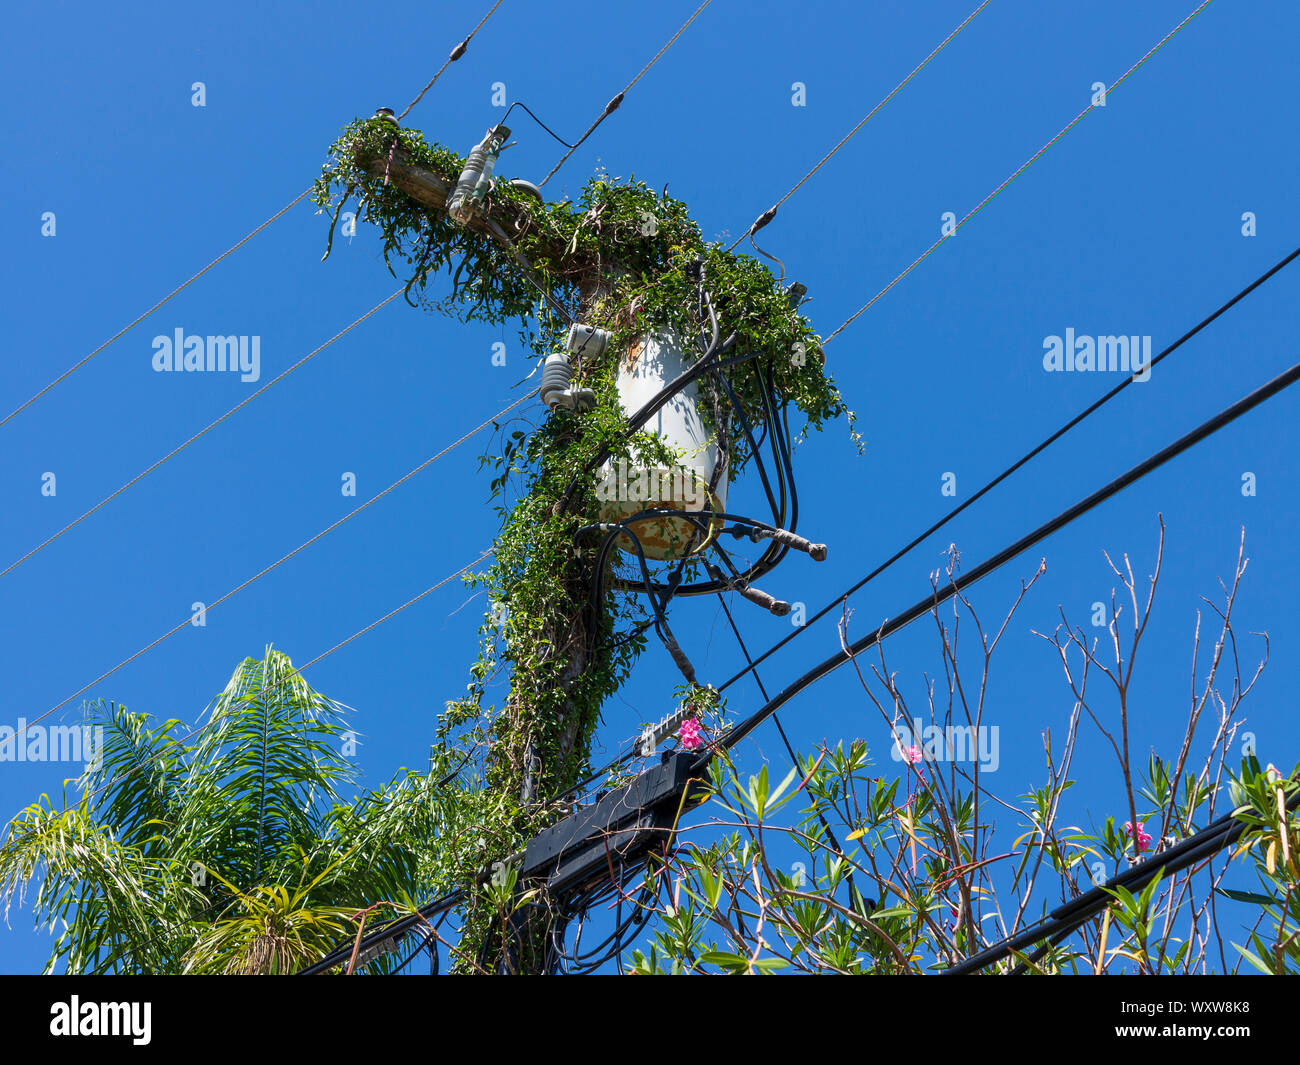 Power lines and electricity poles overgrown with climbing plants against a blue sky in Bermuda Stock Photo